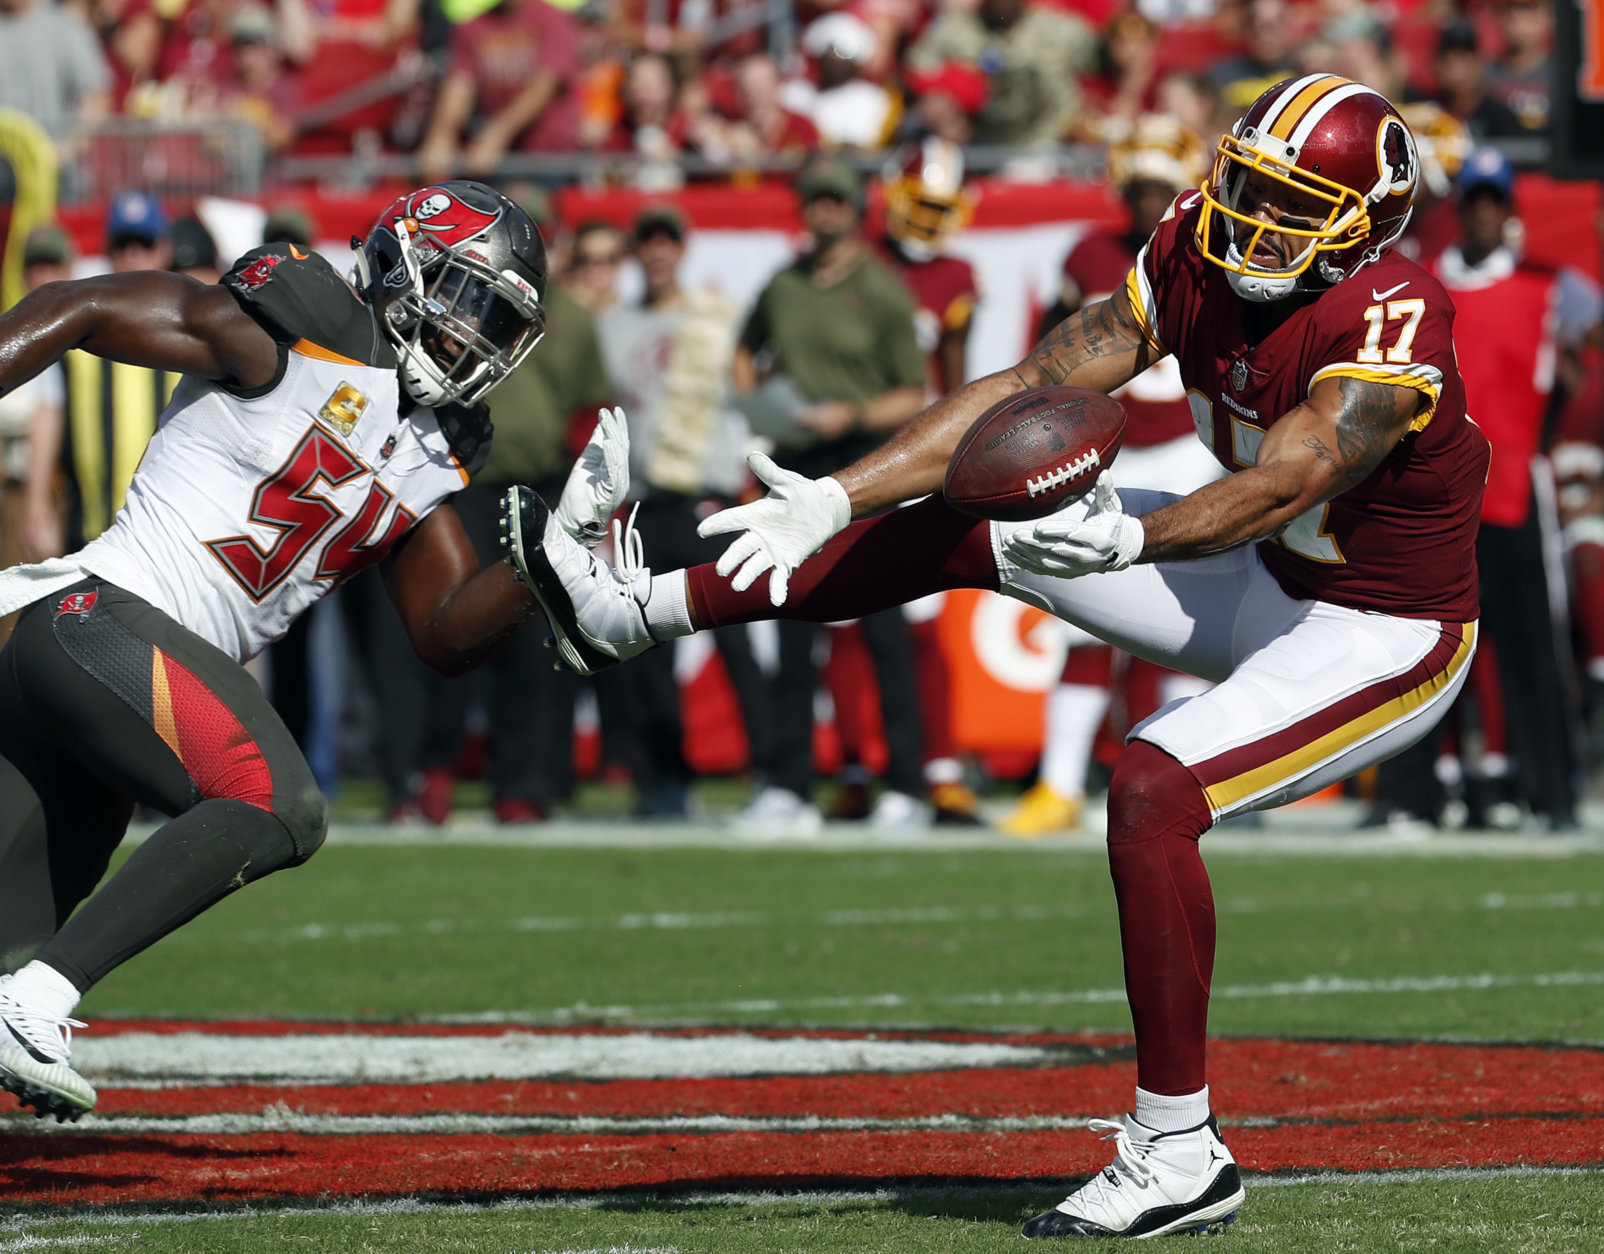 Washington Redskins wide receiver Michael Floyd (17) reaches for the ball after getting around Tampa Bay Buccaneers outside linebacker Lavonte David (54) during the first half of an NFL football game Sunday, Nov. 11, 2018, in Tampa, Fla. (AP Photo/Mark LoMoglio)